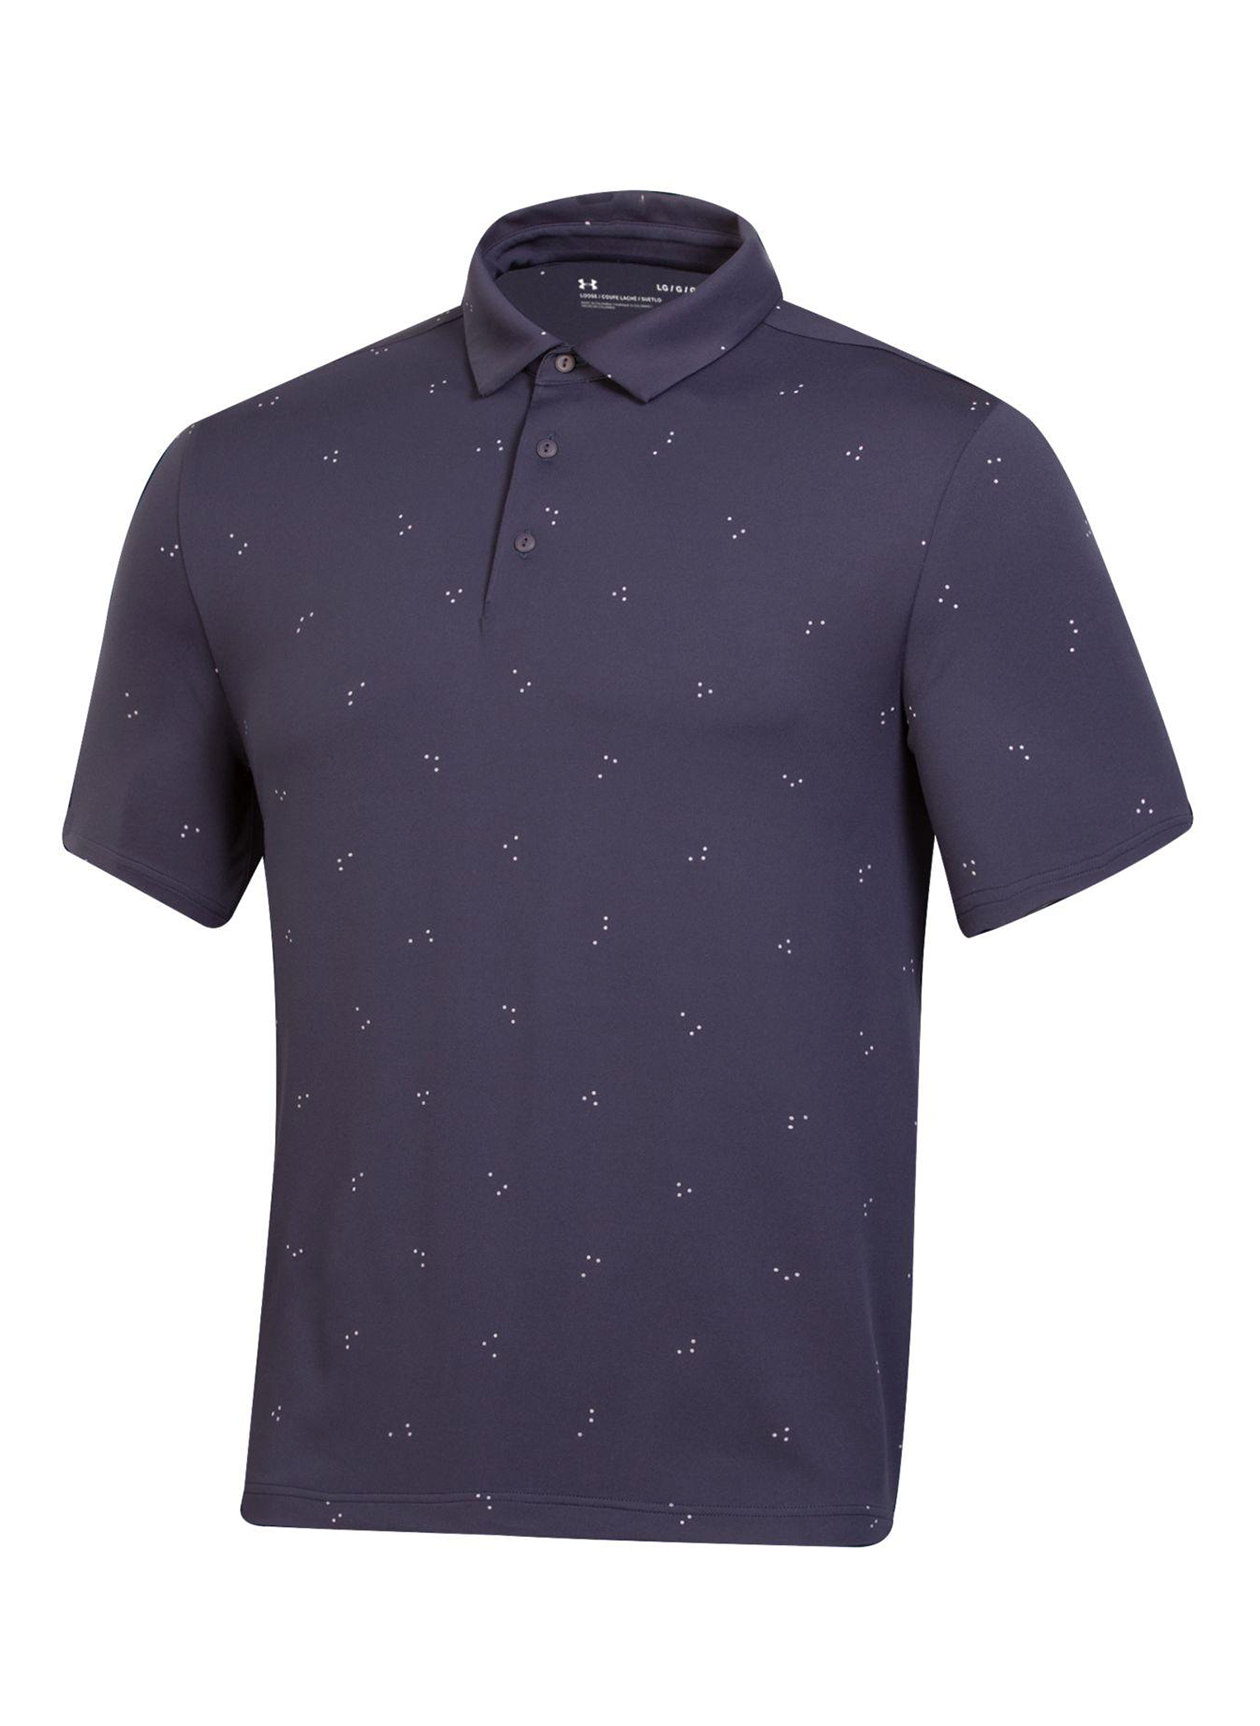 12ct. Custom Under Armour Men's Midnight Navy Novelty Playoff 3.0 Scatter Print Polo by Corporate Gear